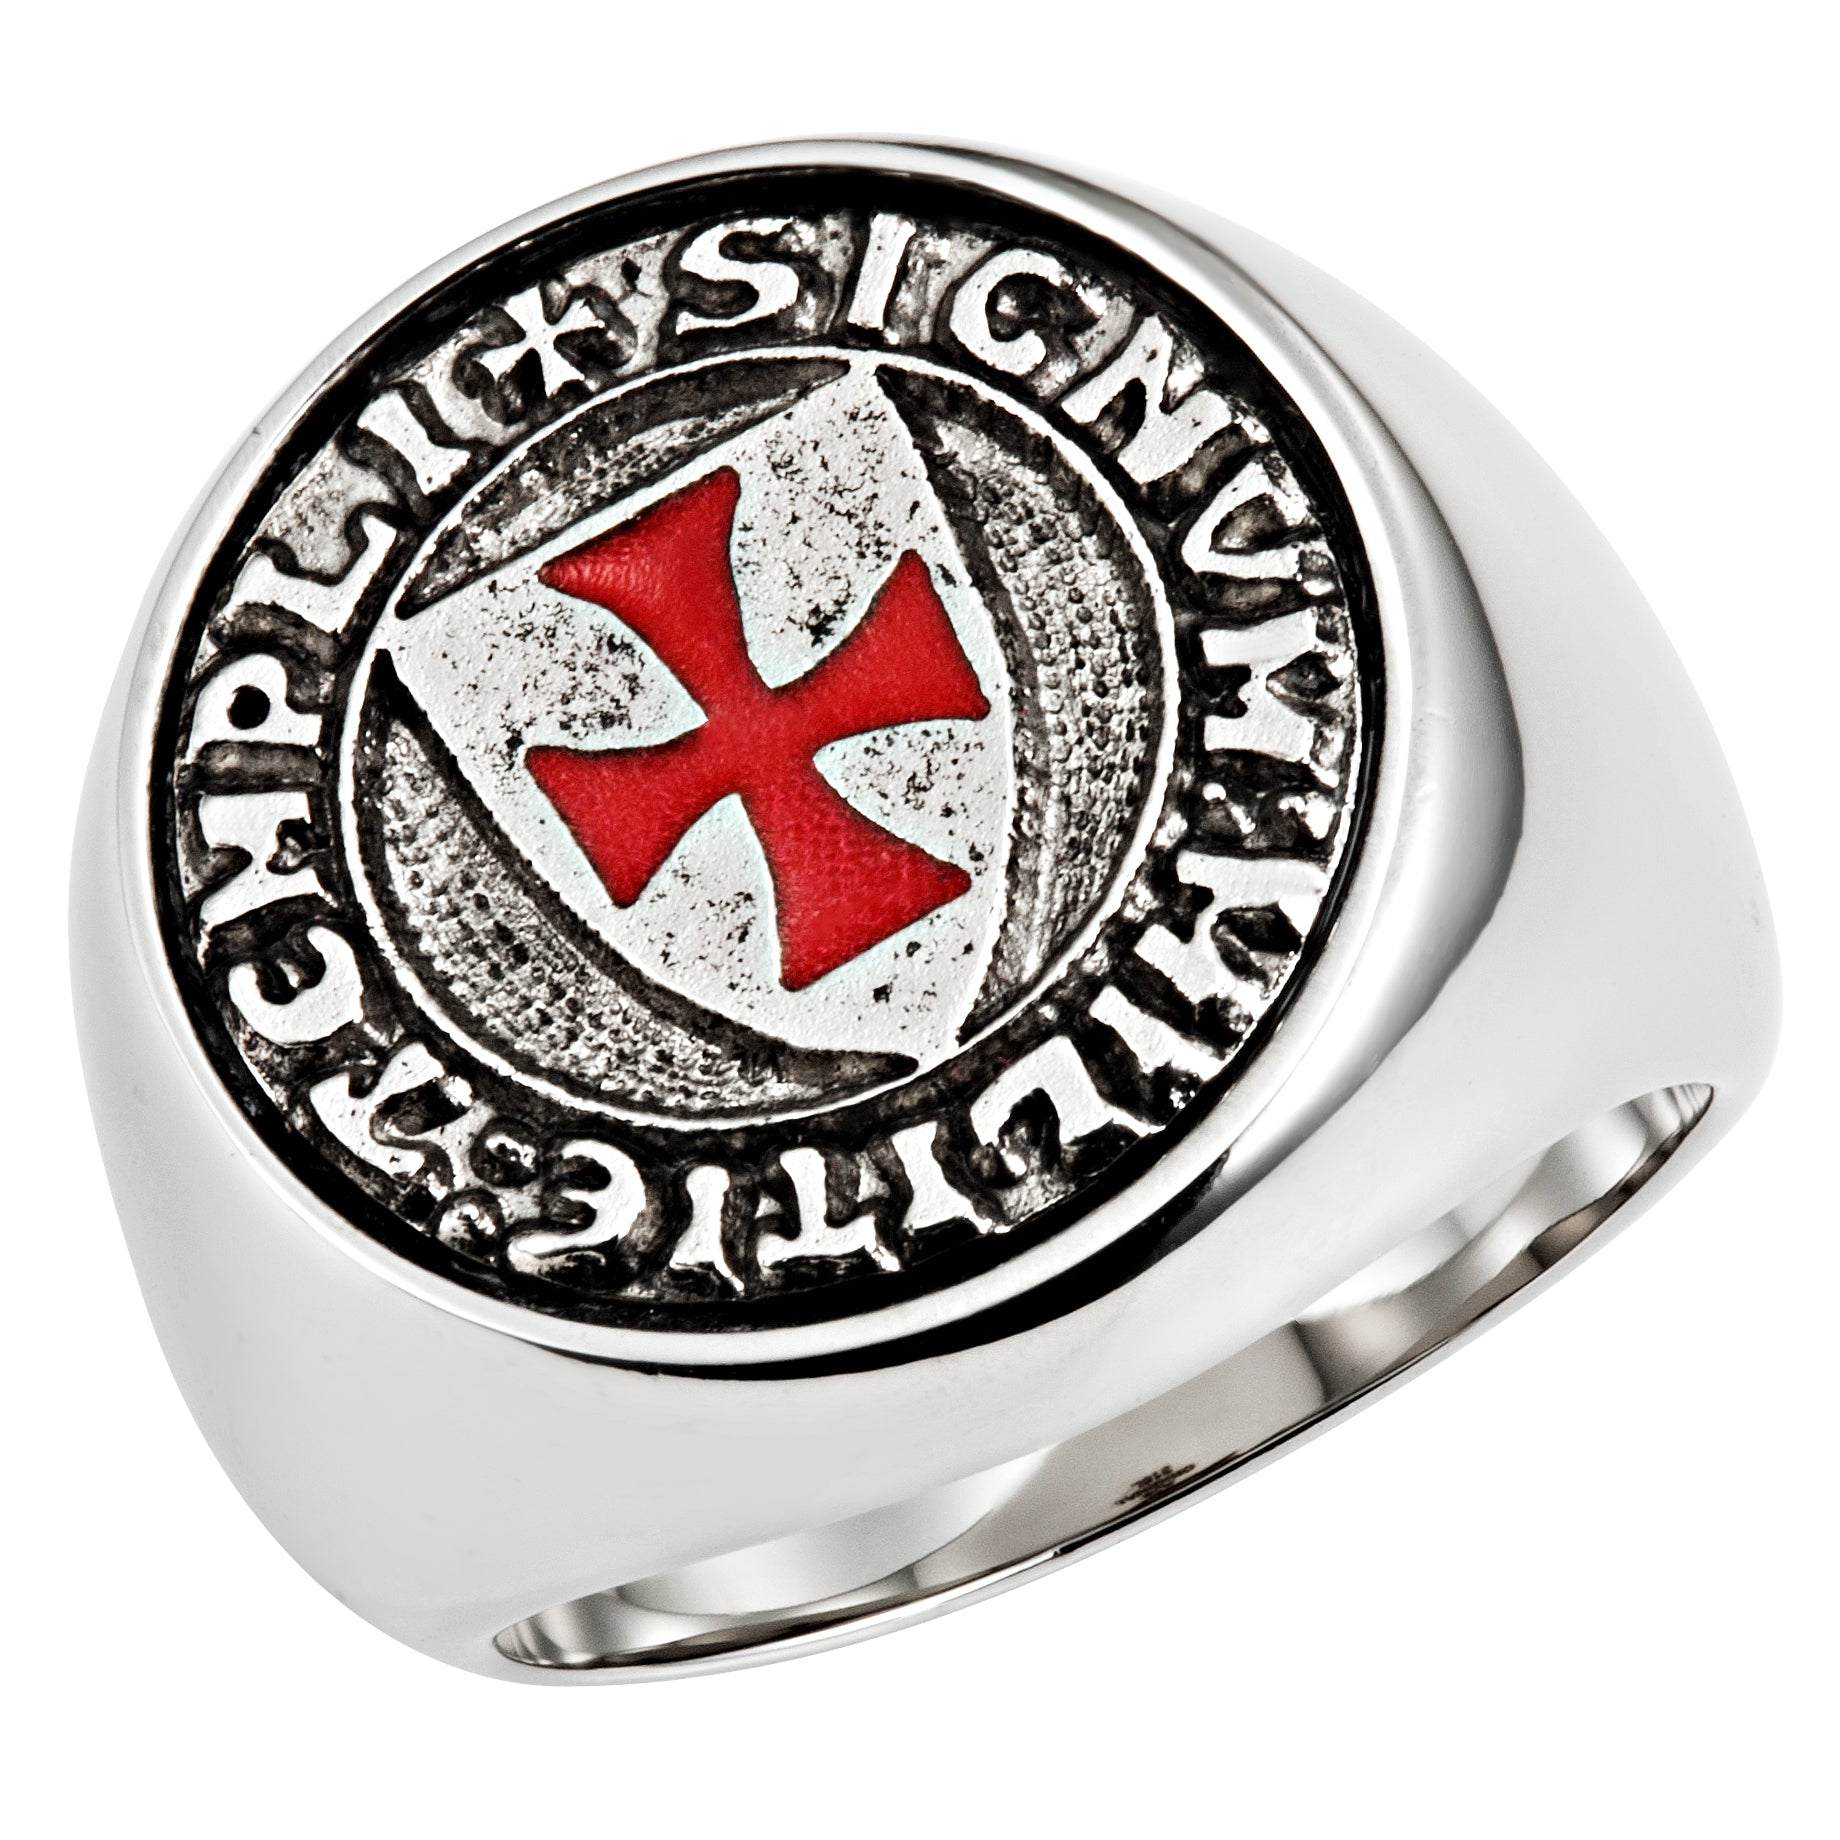 Stainless Steel Knights Templar Ring with Latin Engraving - MasonicMan